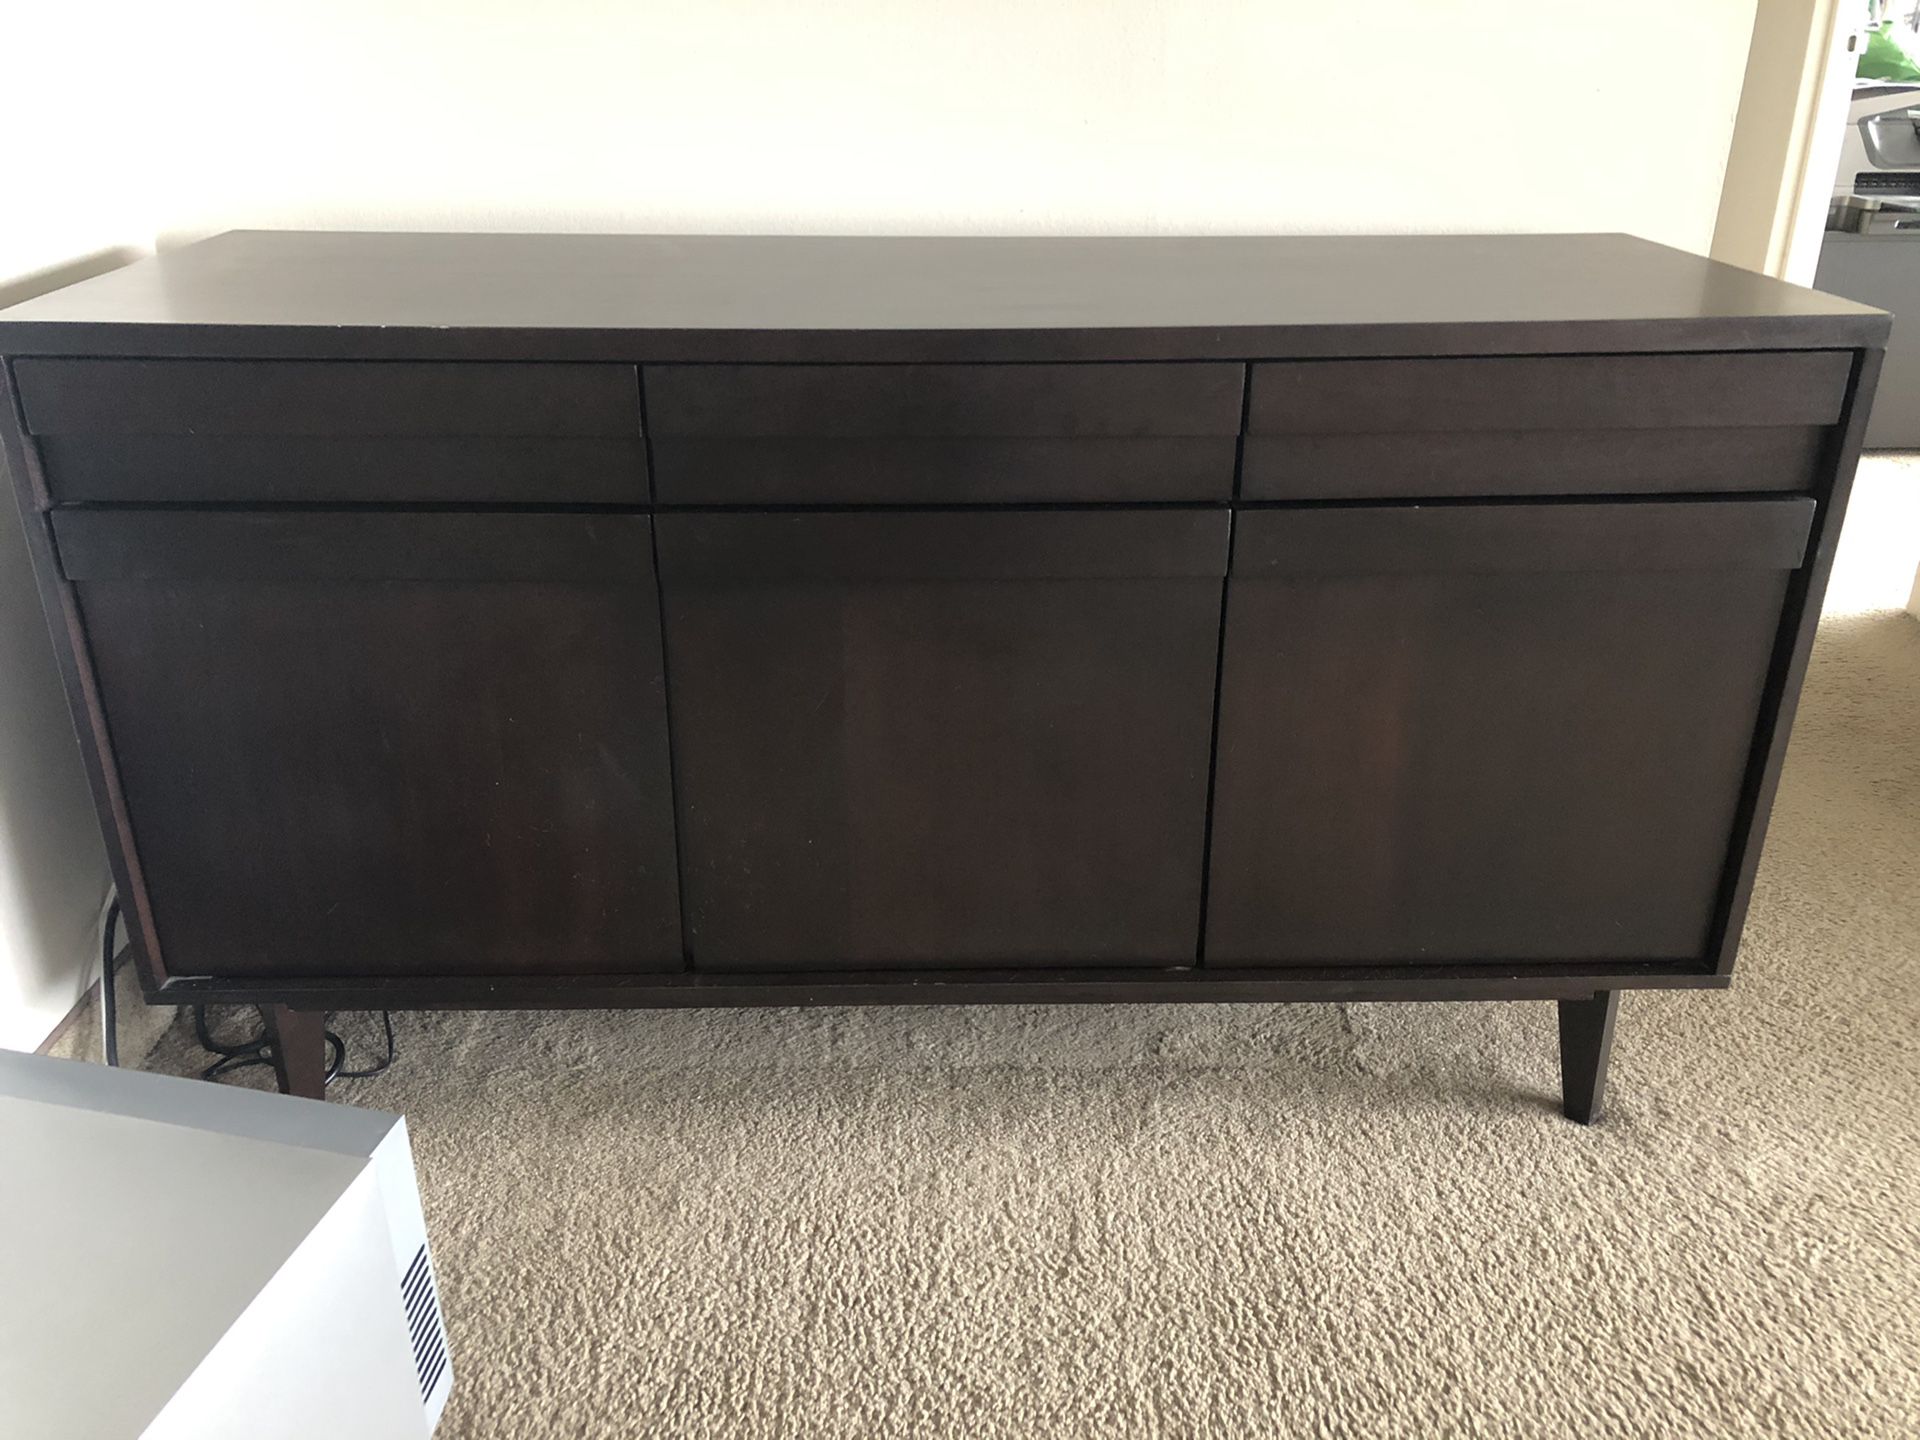 Crate and Barrel Buffet/Server/Sideboard